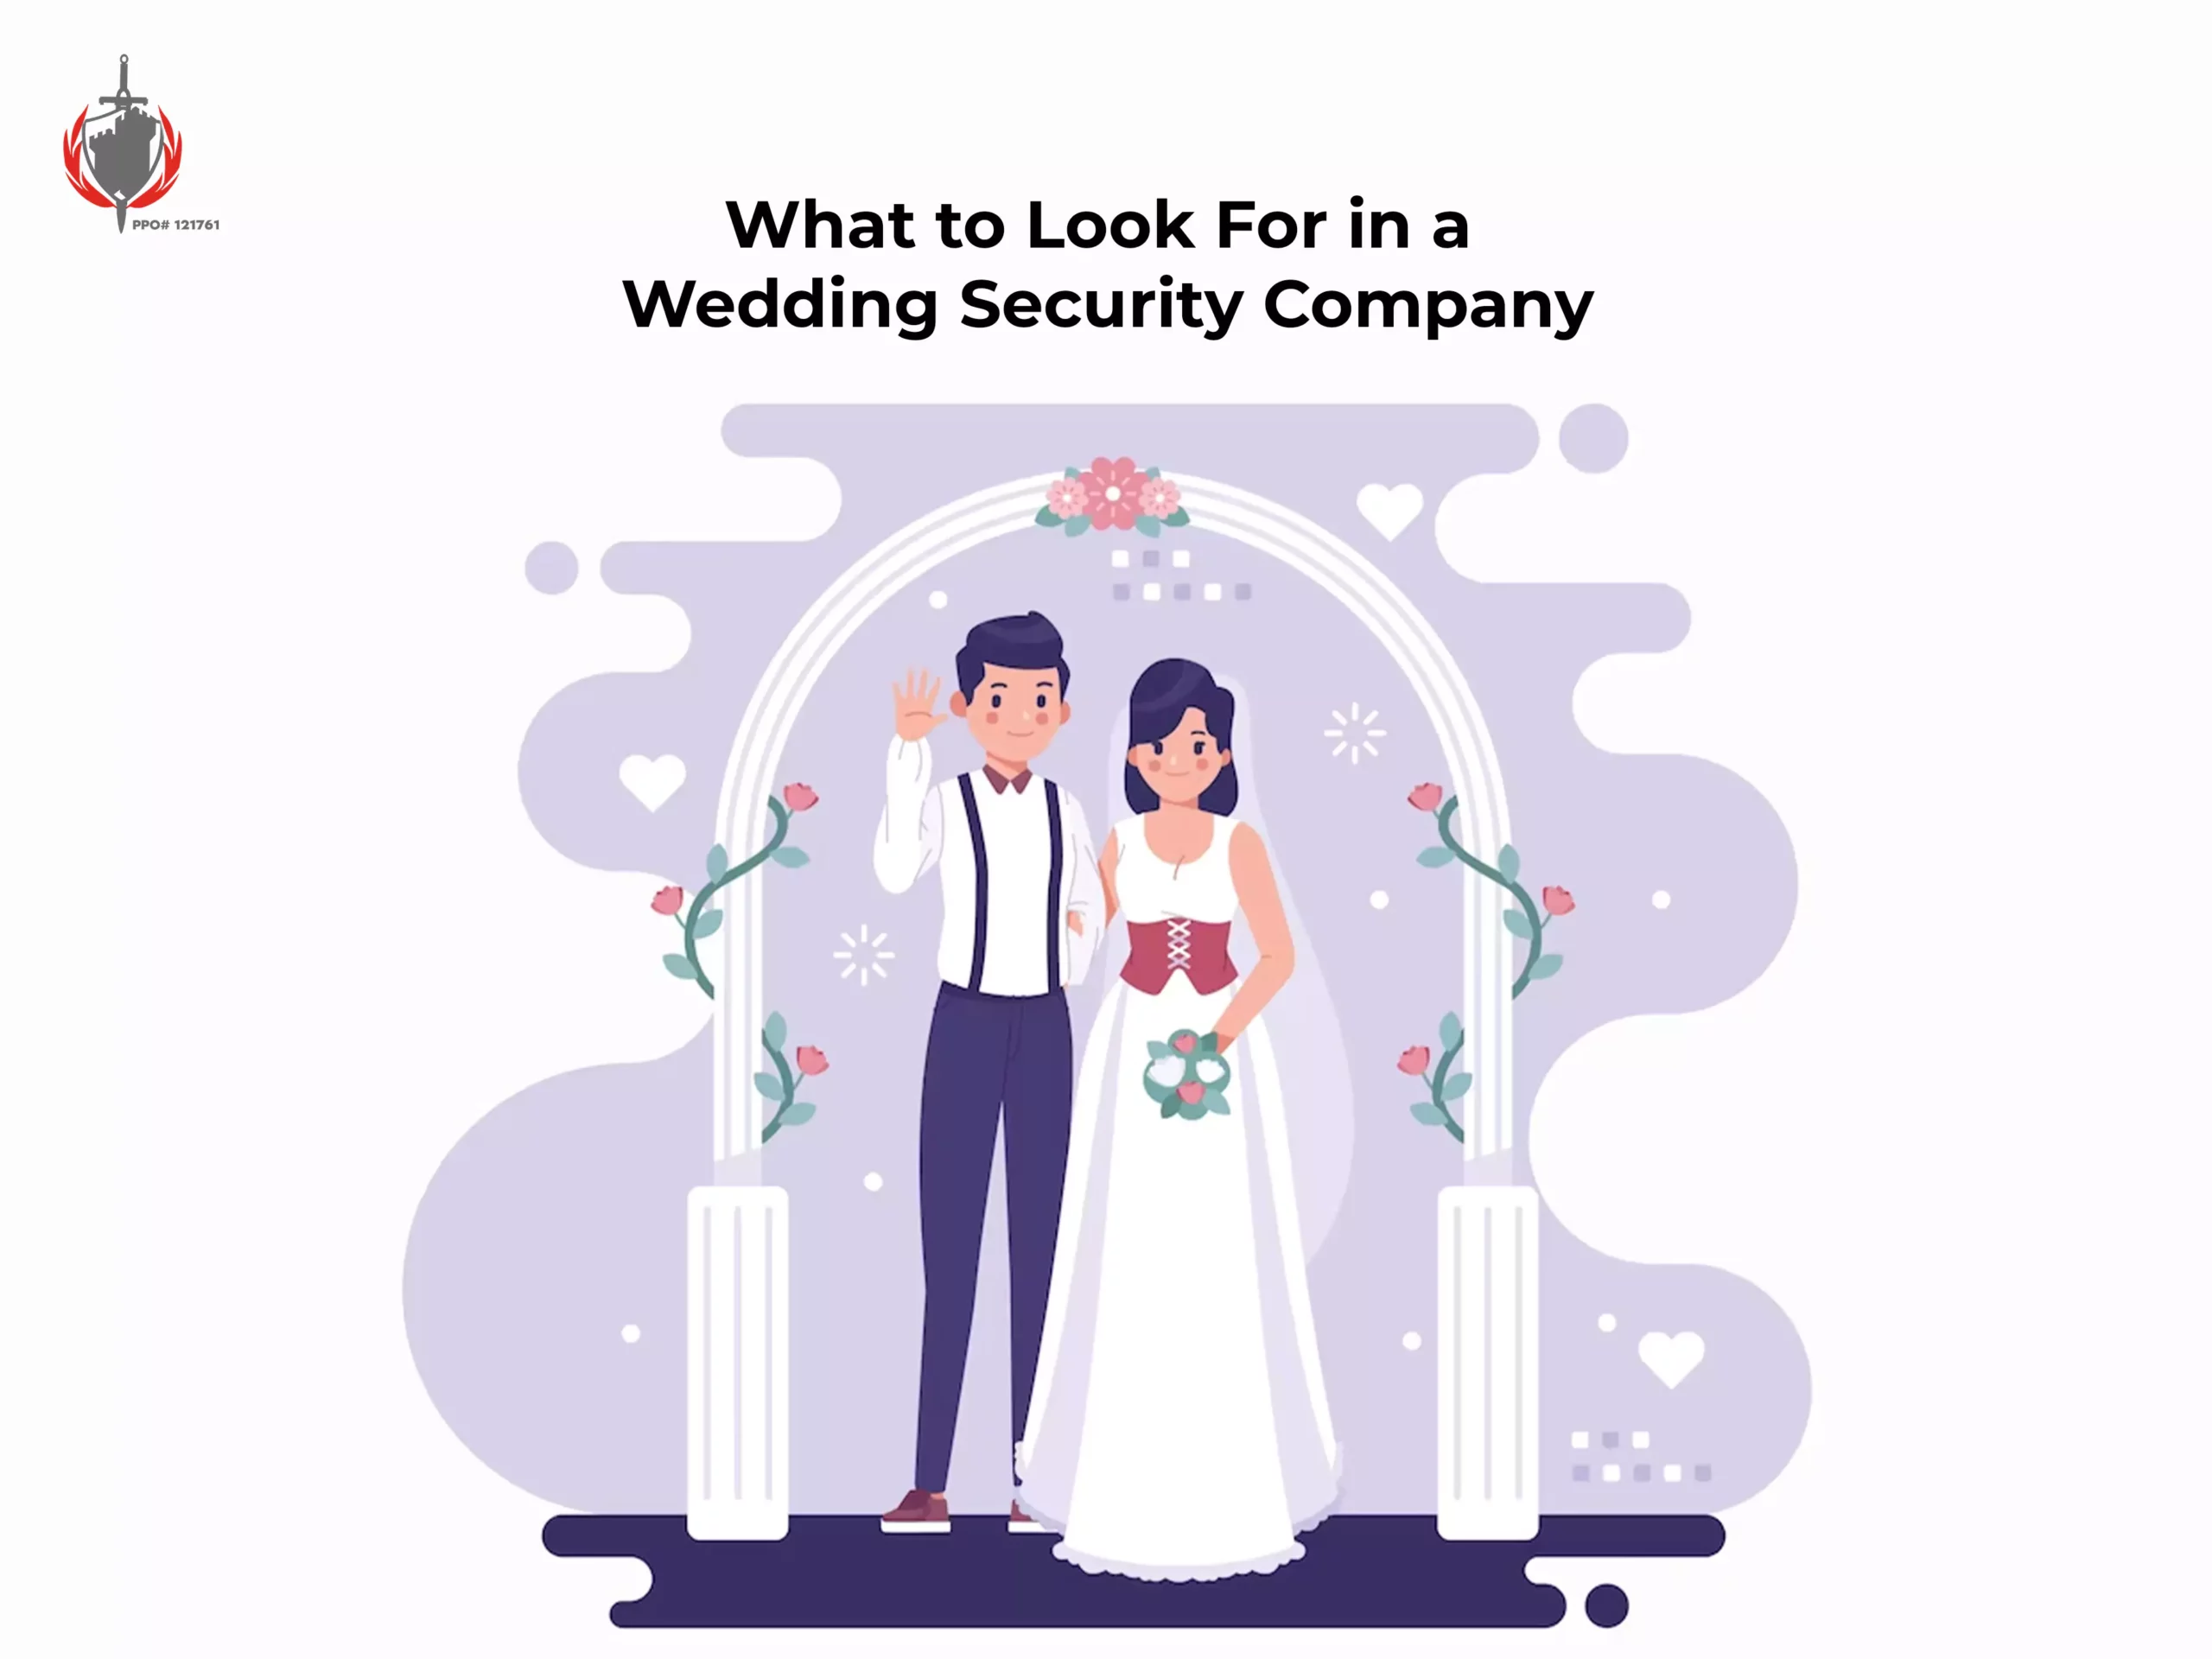 What to Look For in a Wedding Security Company